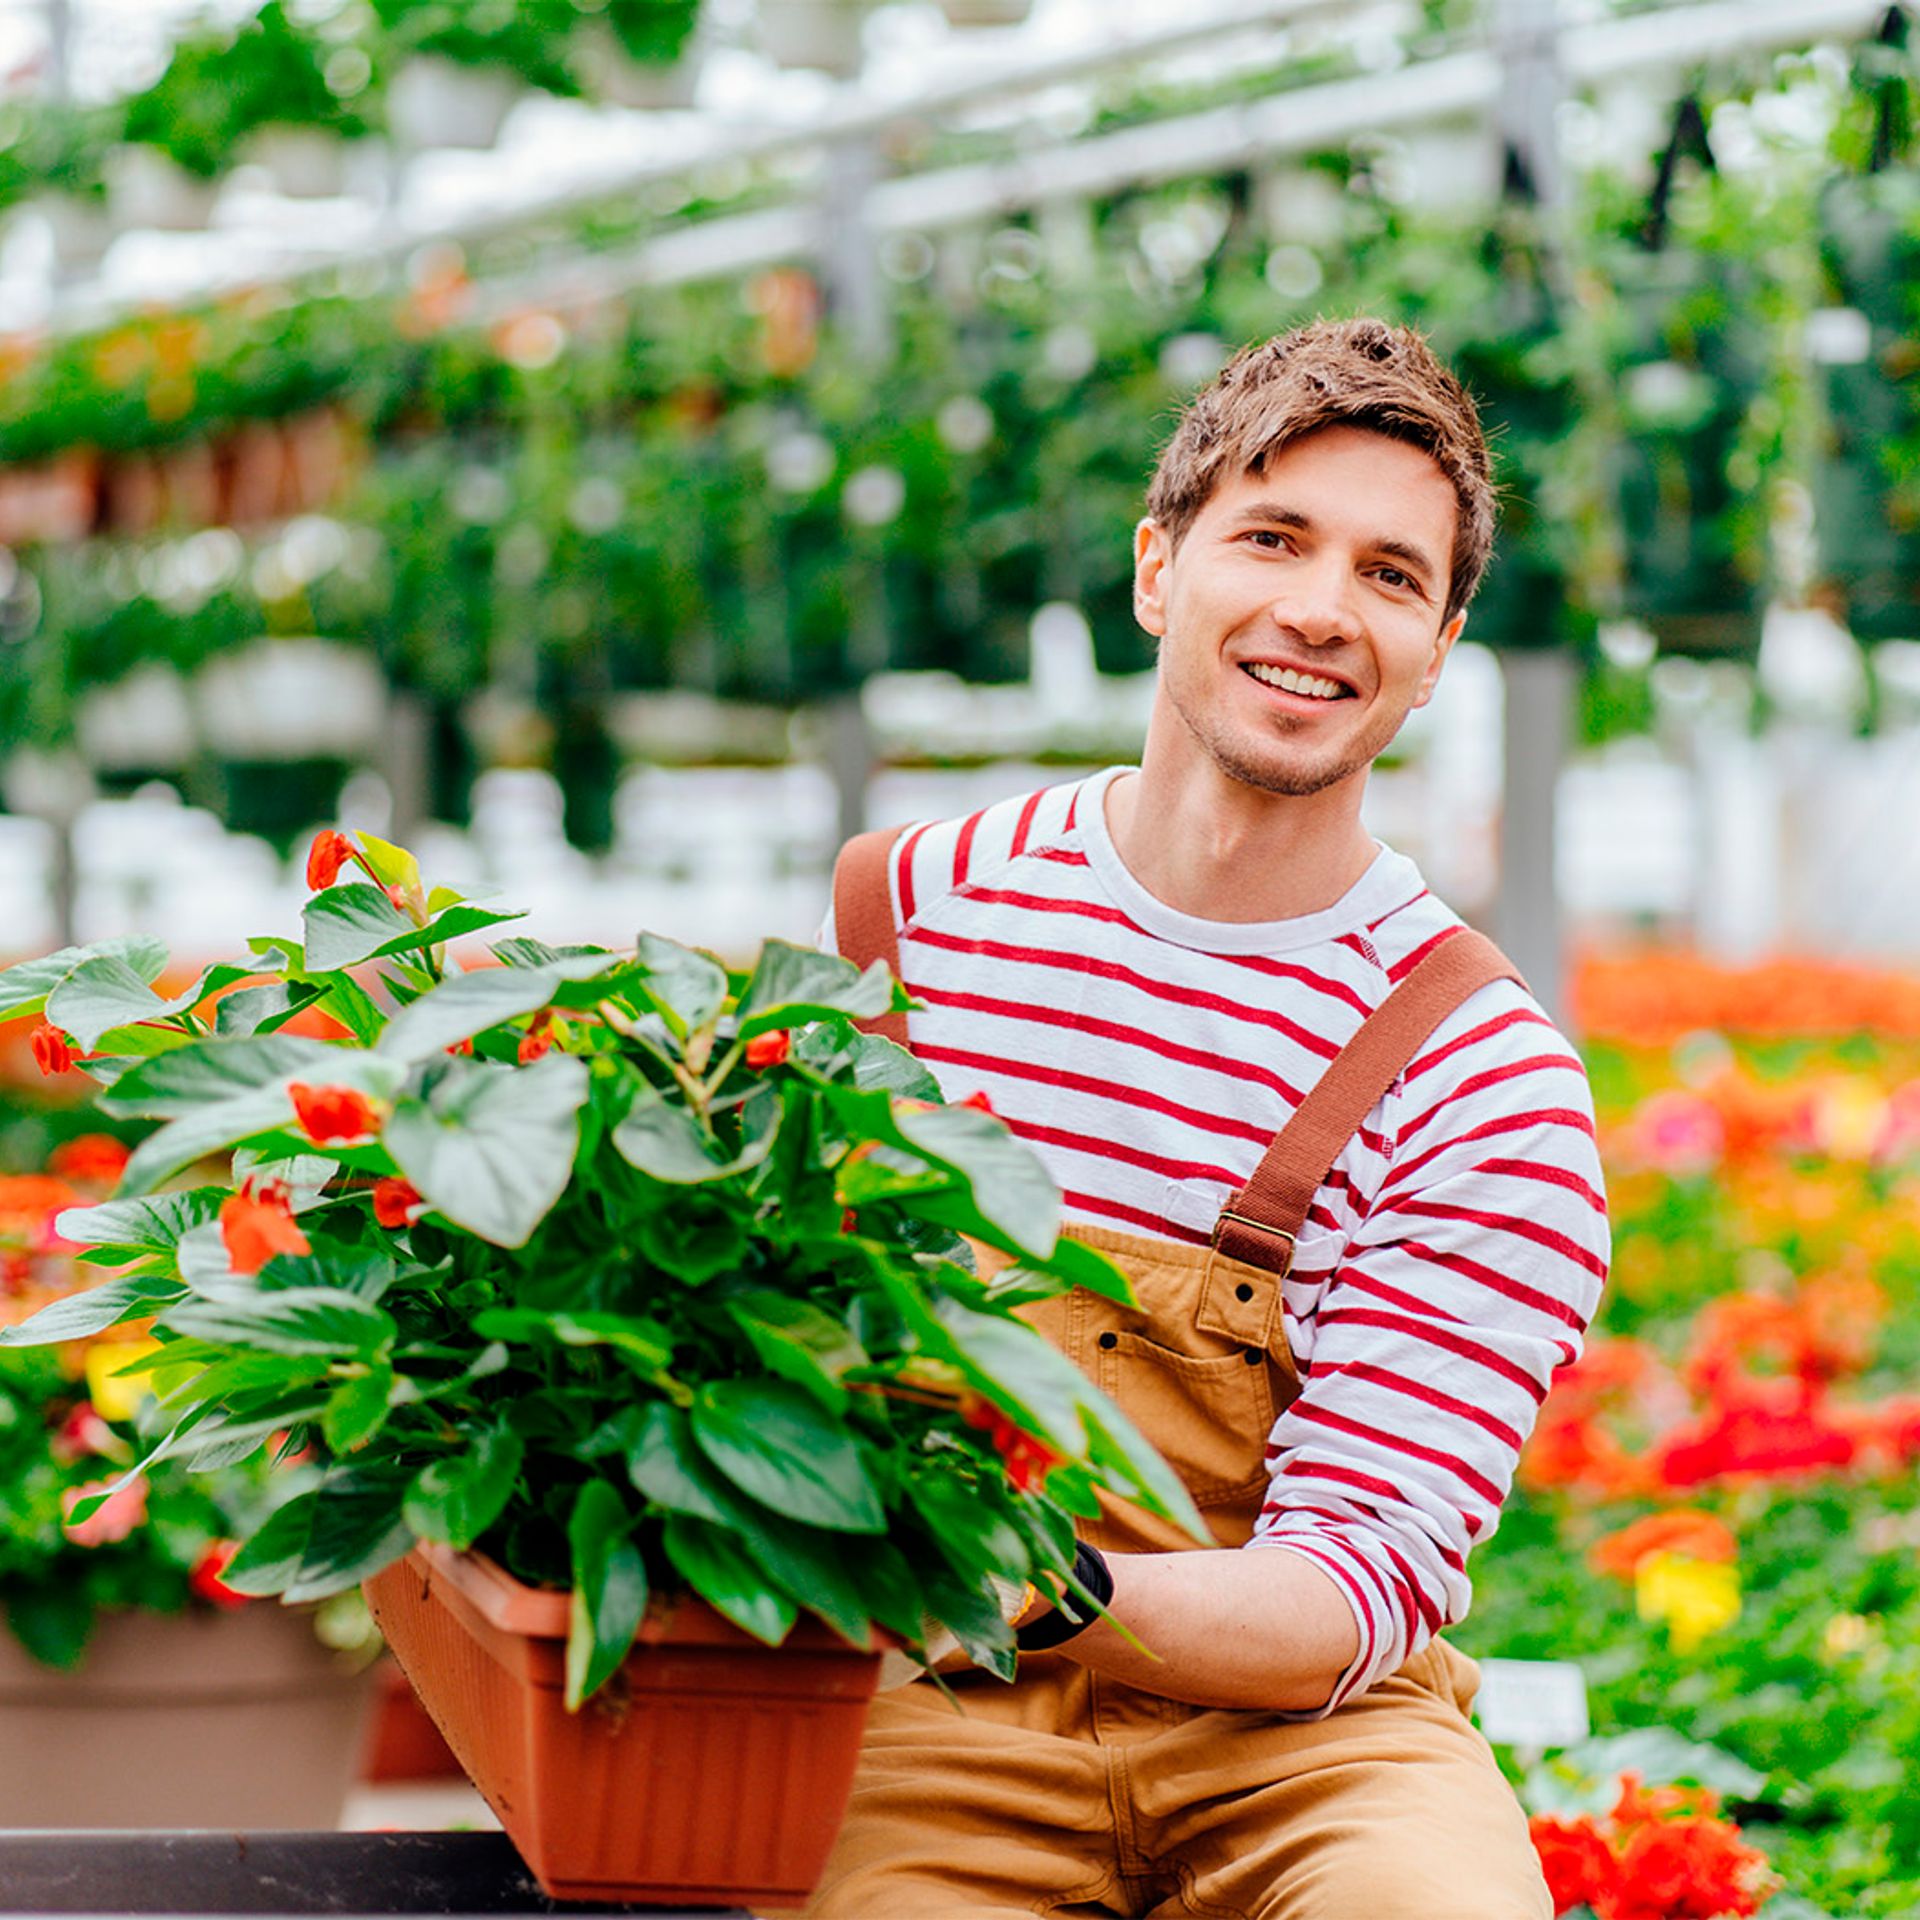 Image of a worker in a greenhouse displaying potted flowers